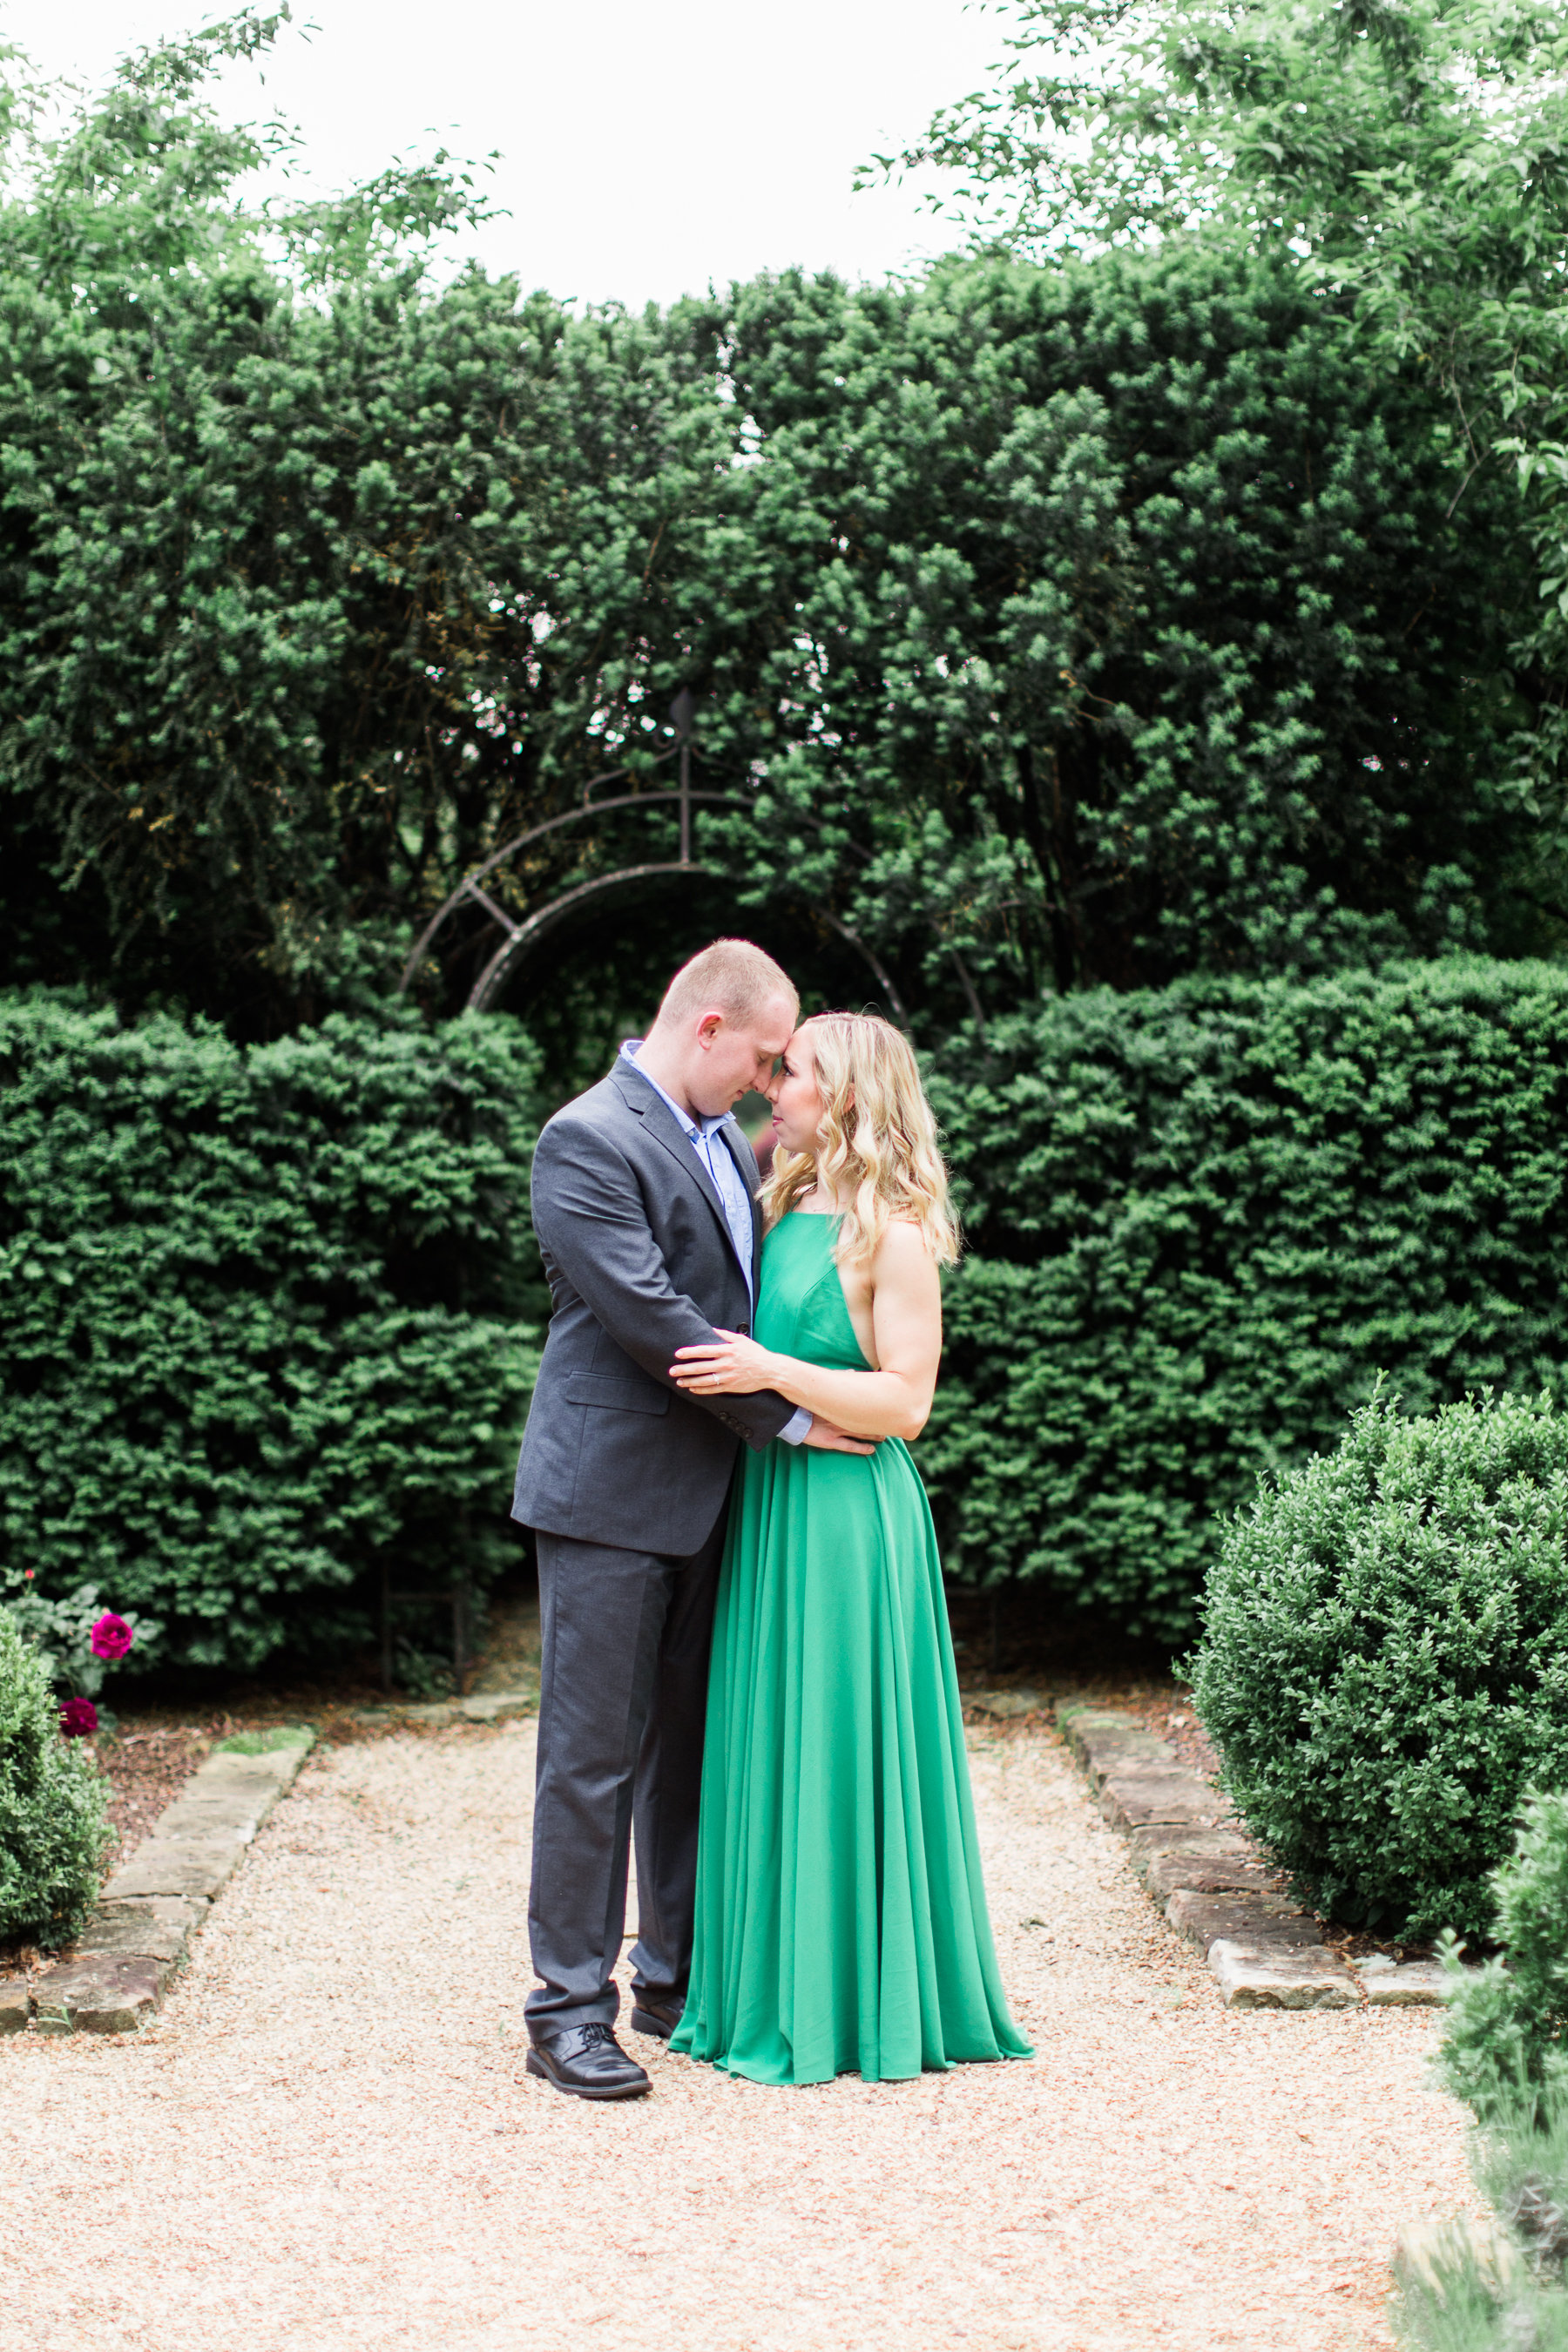 A Waterperry Farm and Gardens Engagement Photos - The Overwhelmed Bride Wedding Blog